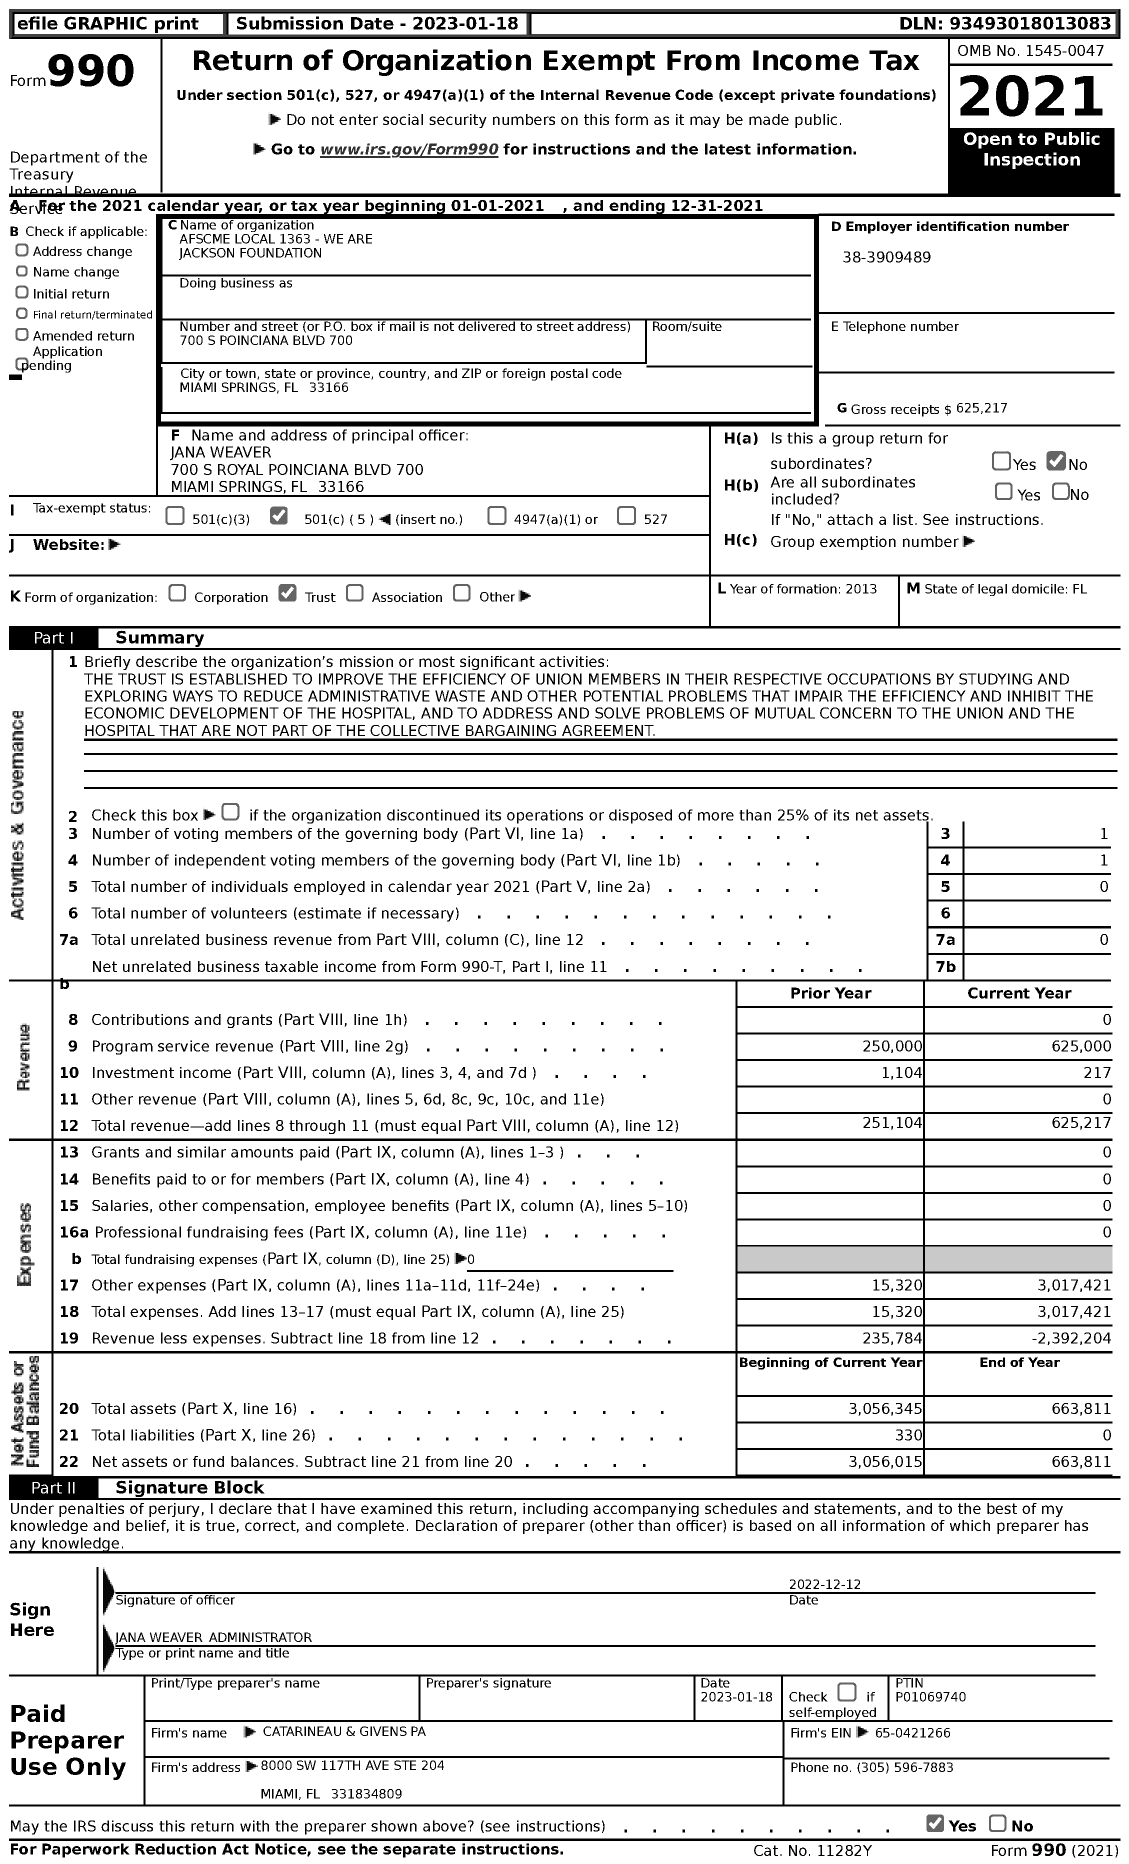 Image of first page of 2021 Form 990 for AFSCME Local 1363 - We Are Jackson Foundation